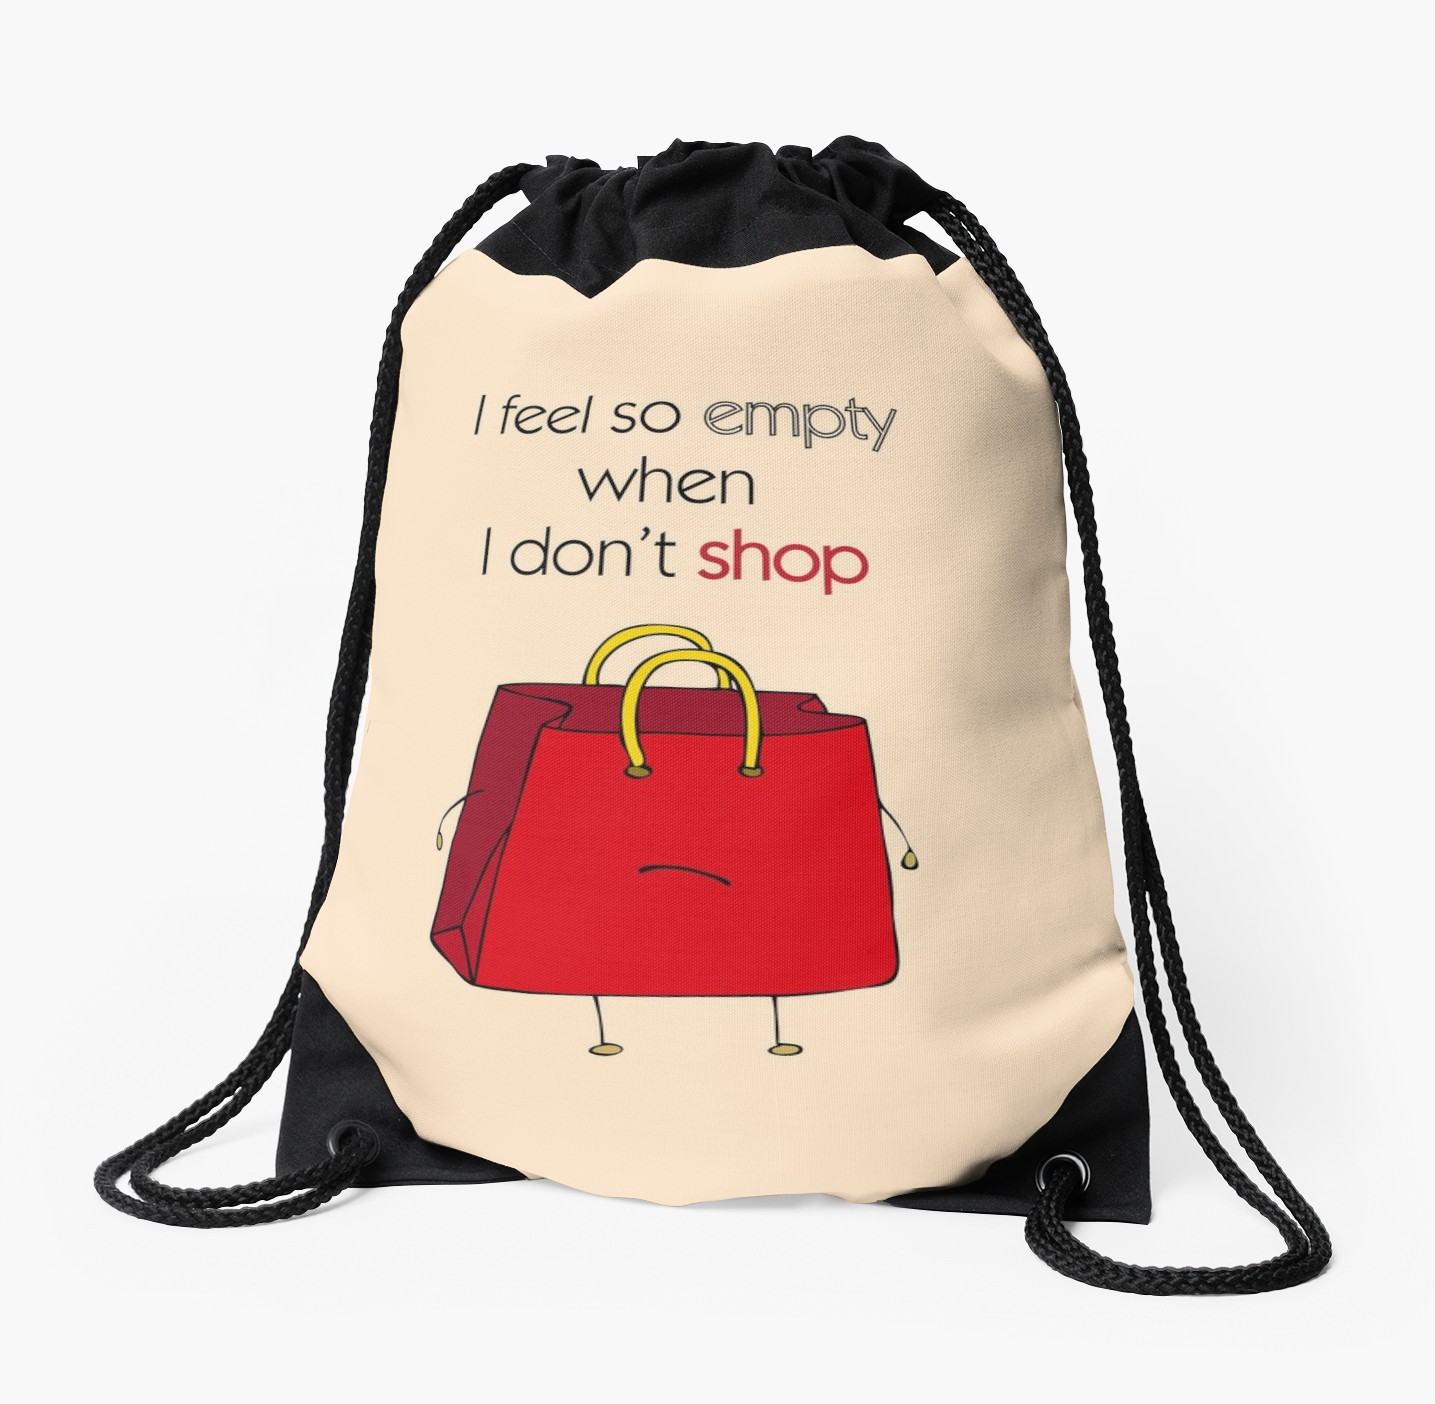 Sad Shopping Bag; Please fill me up; Let's go shopping